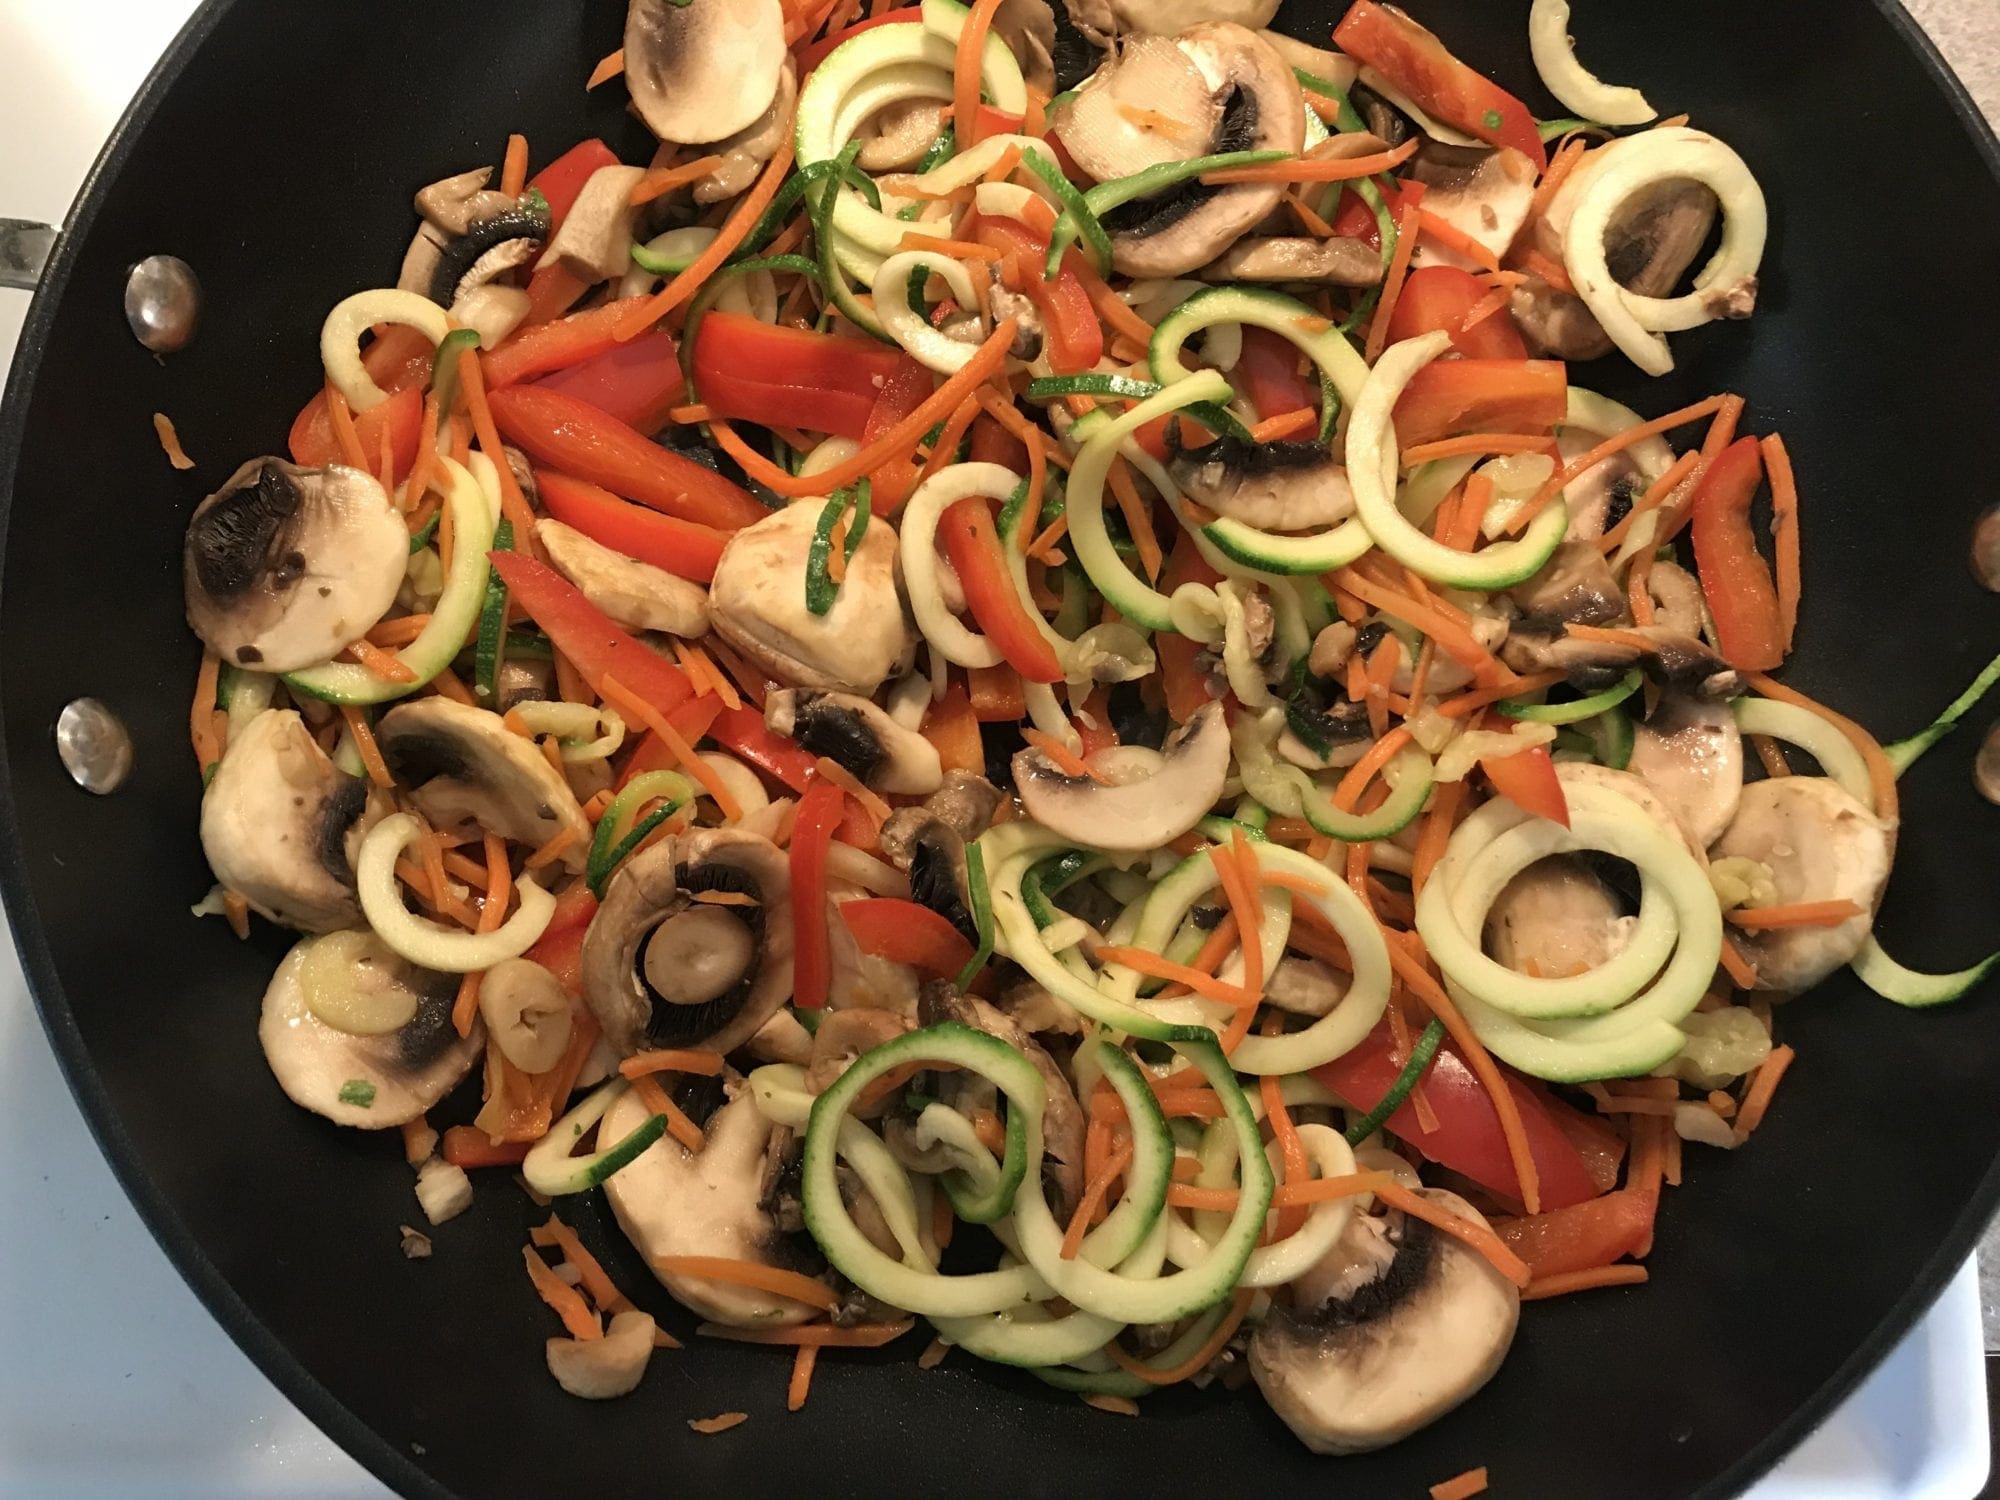 Cooking vegetables for a stir fry recipe.